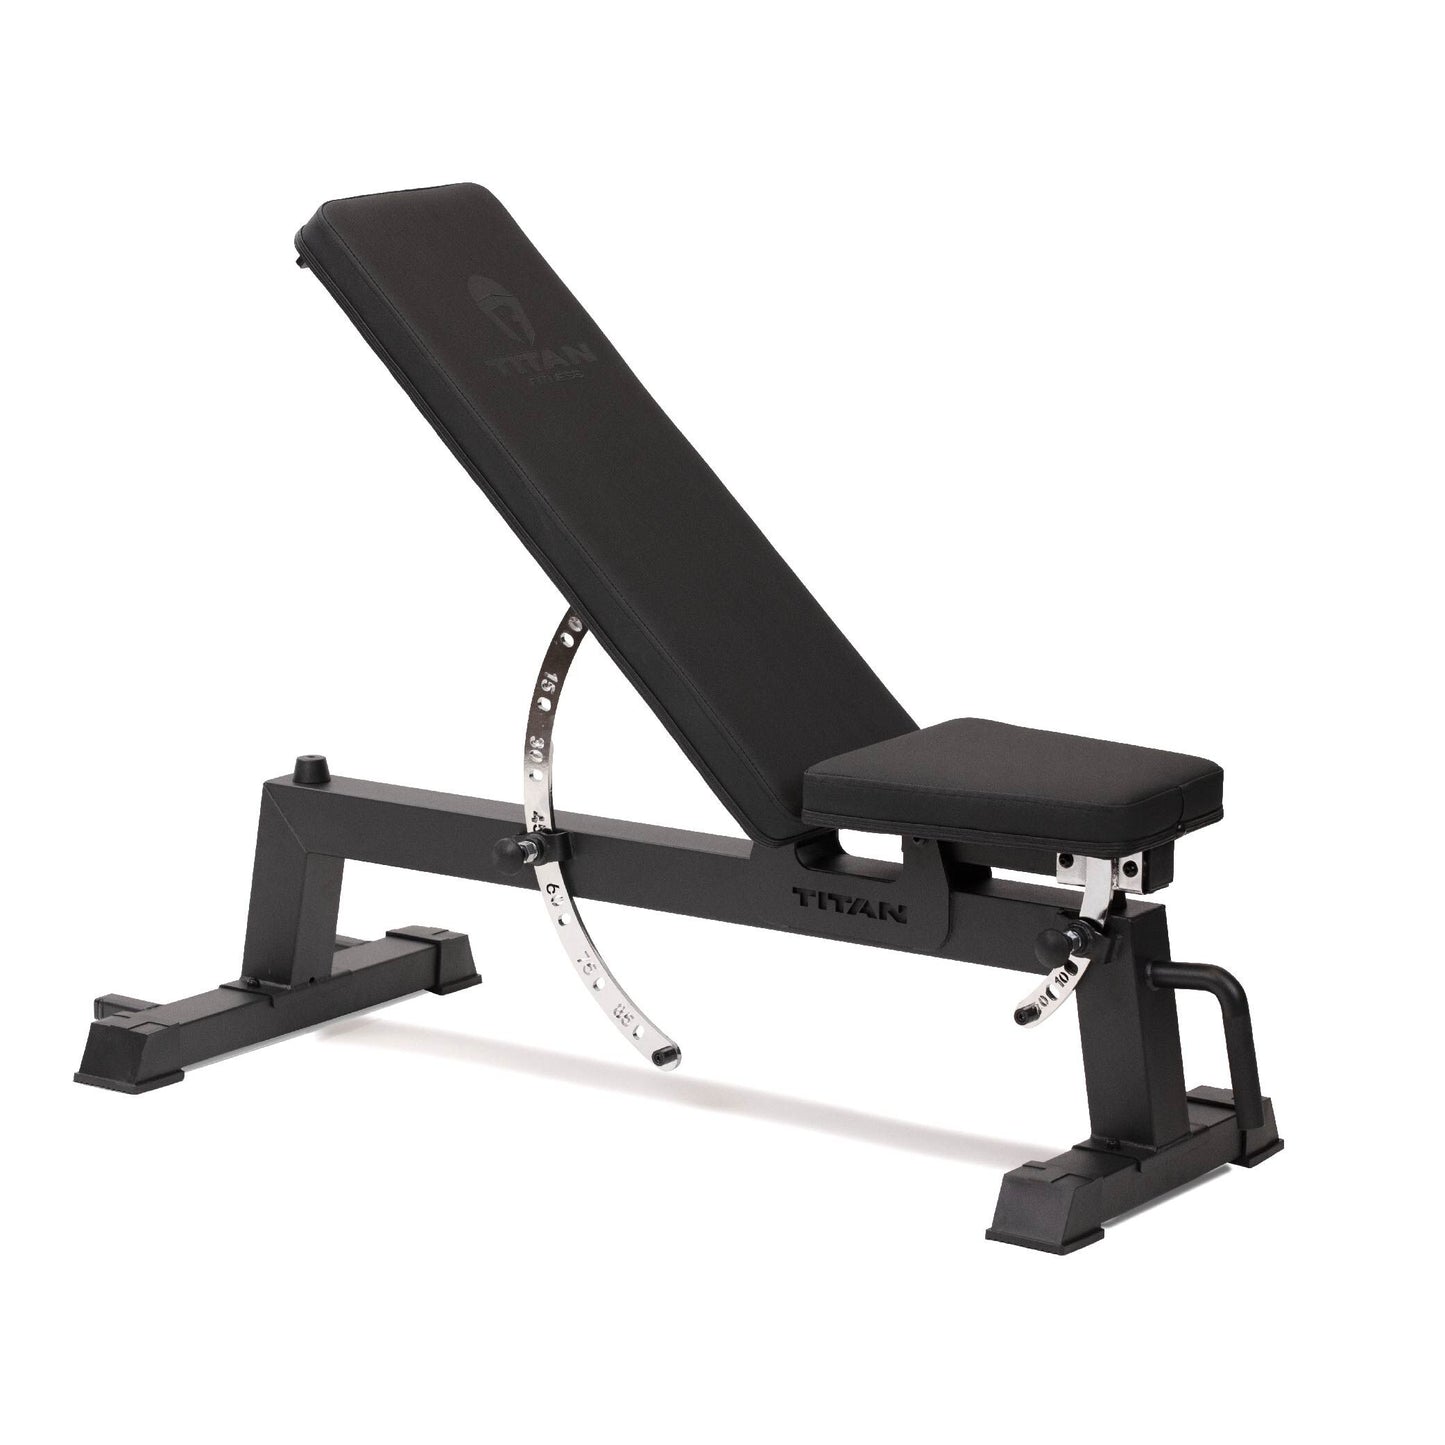 Performance Series Adjustable Bench - view 1